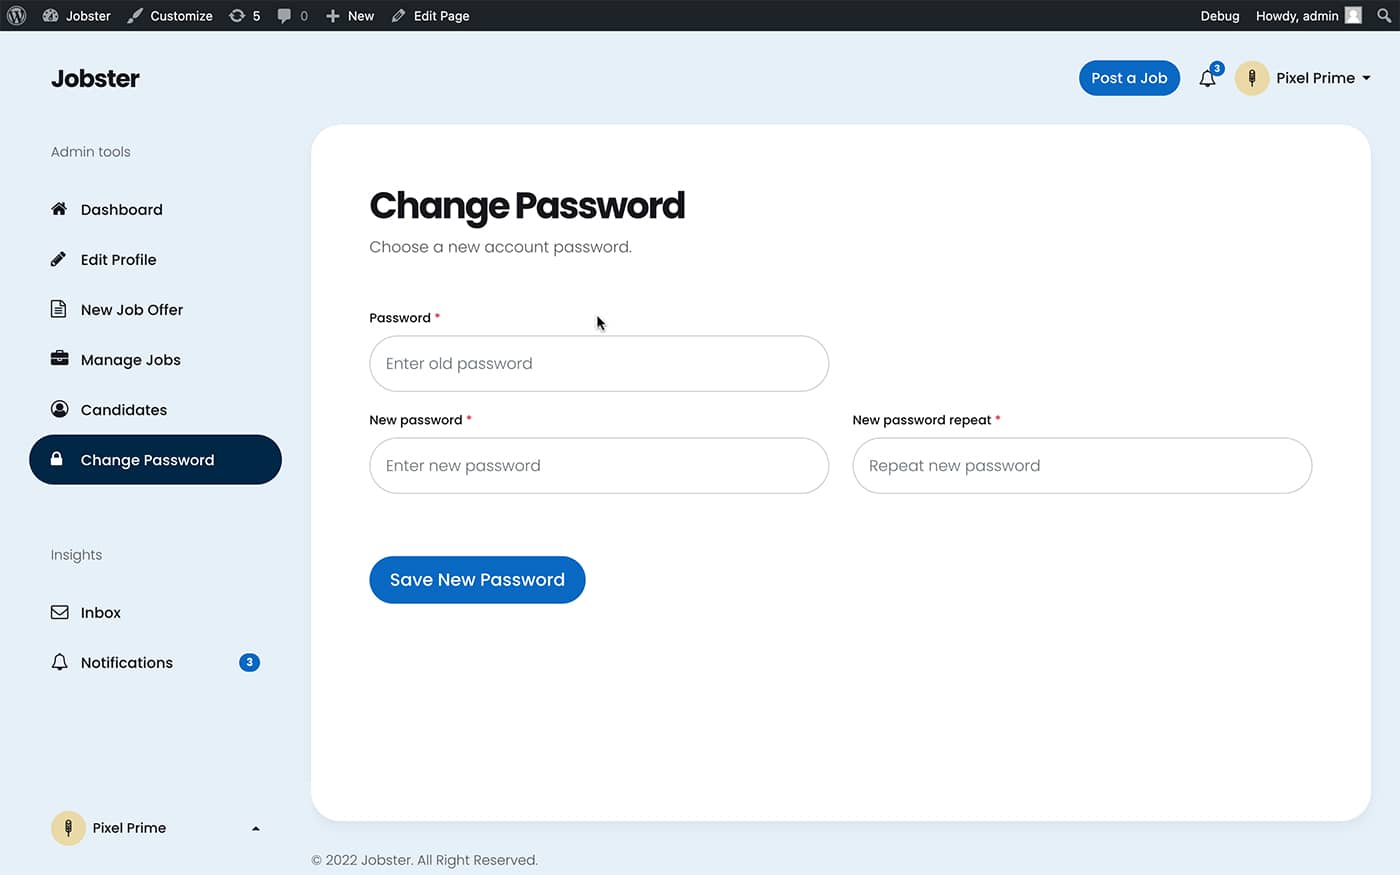 Jobster company change password jobs page front-end